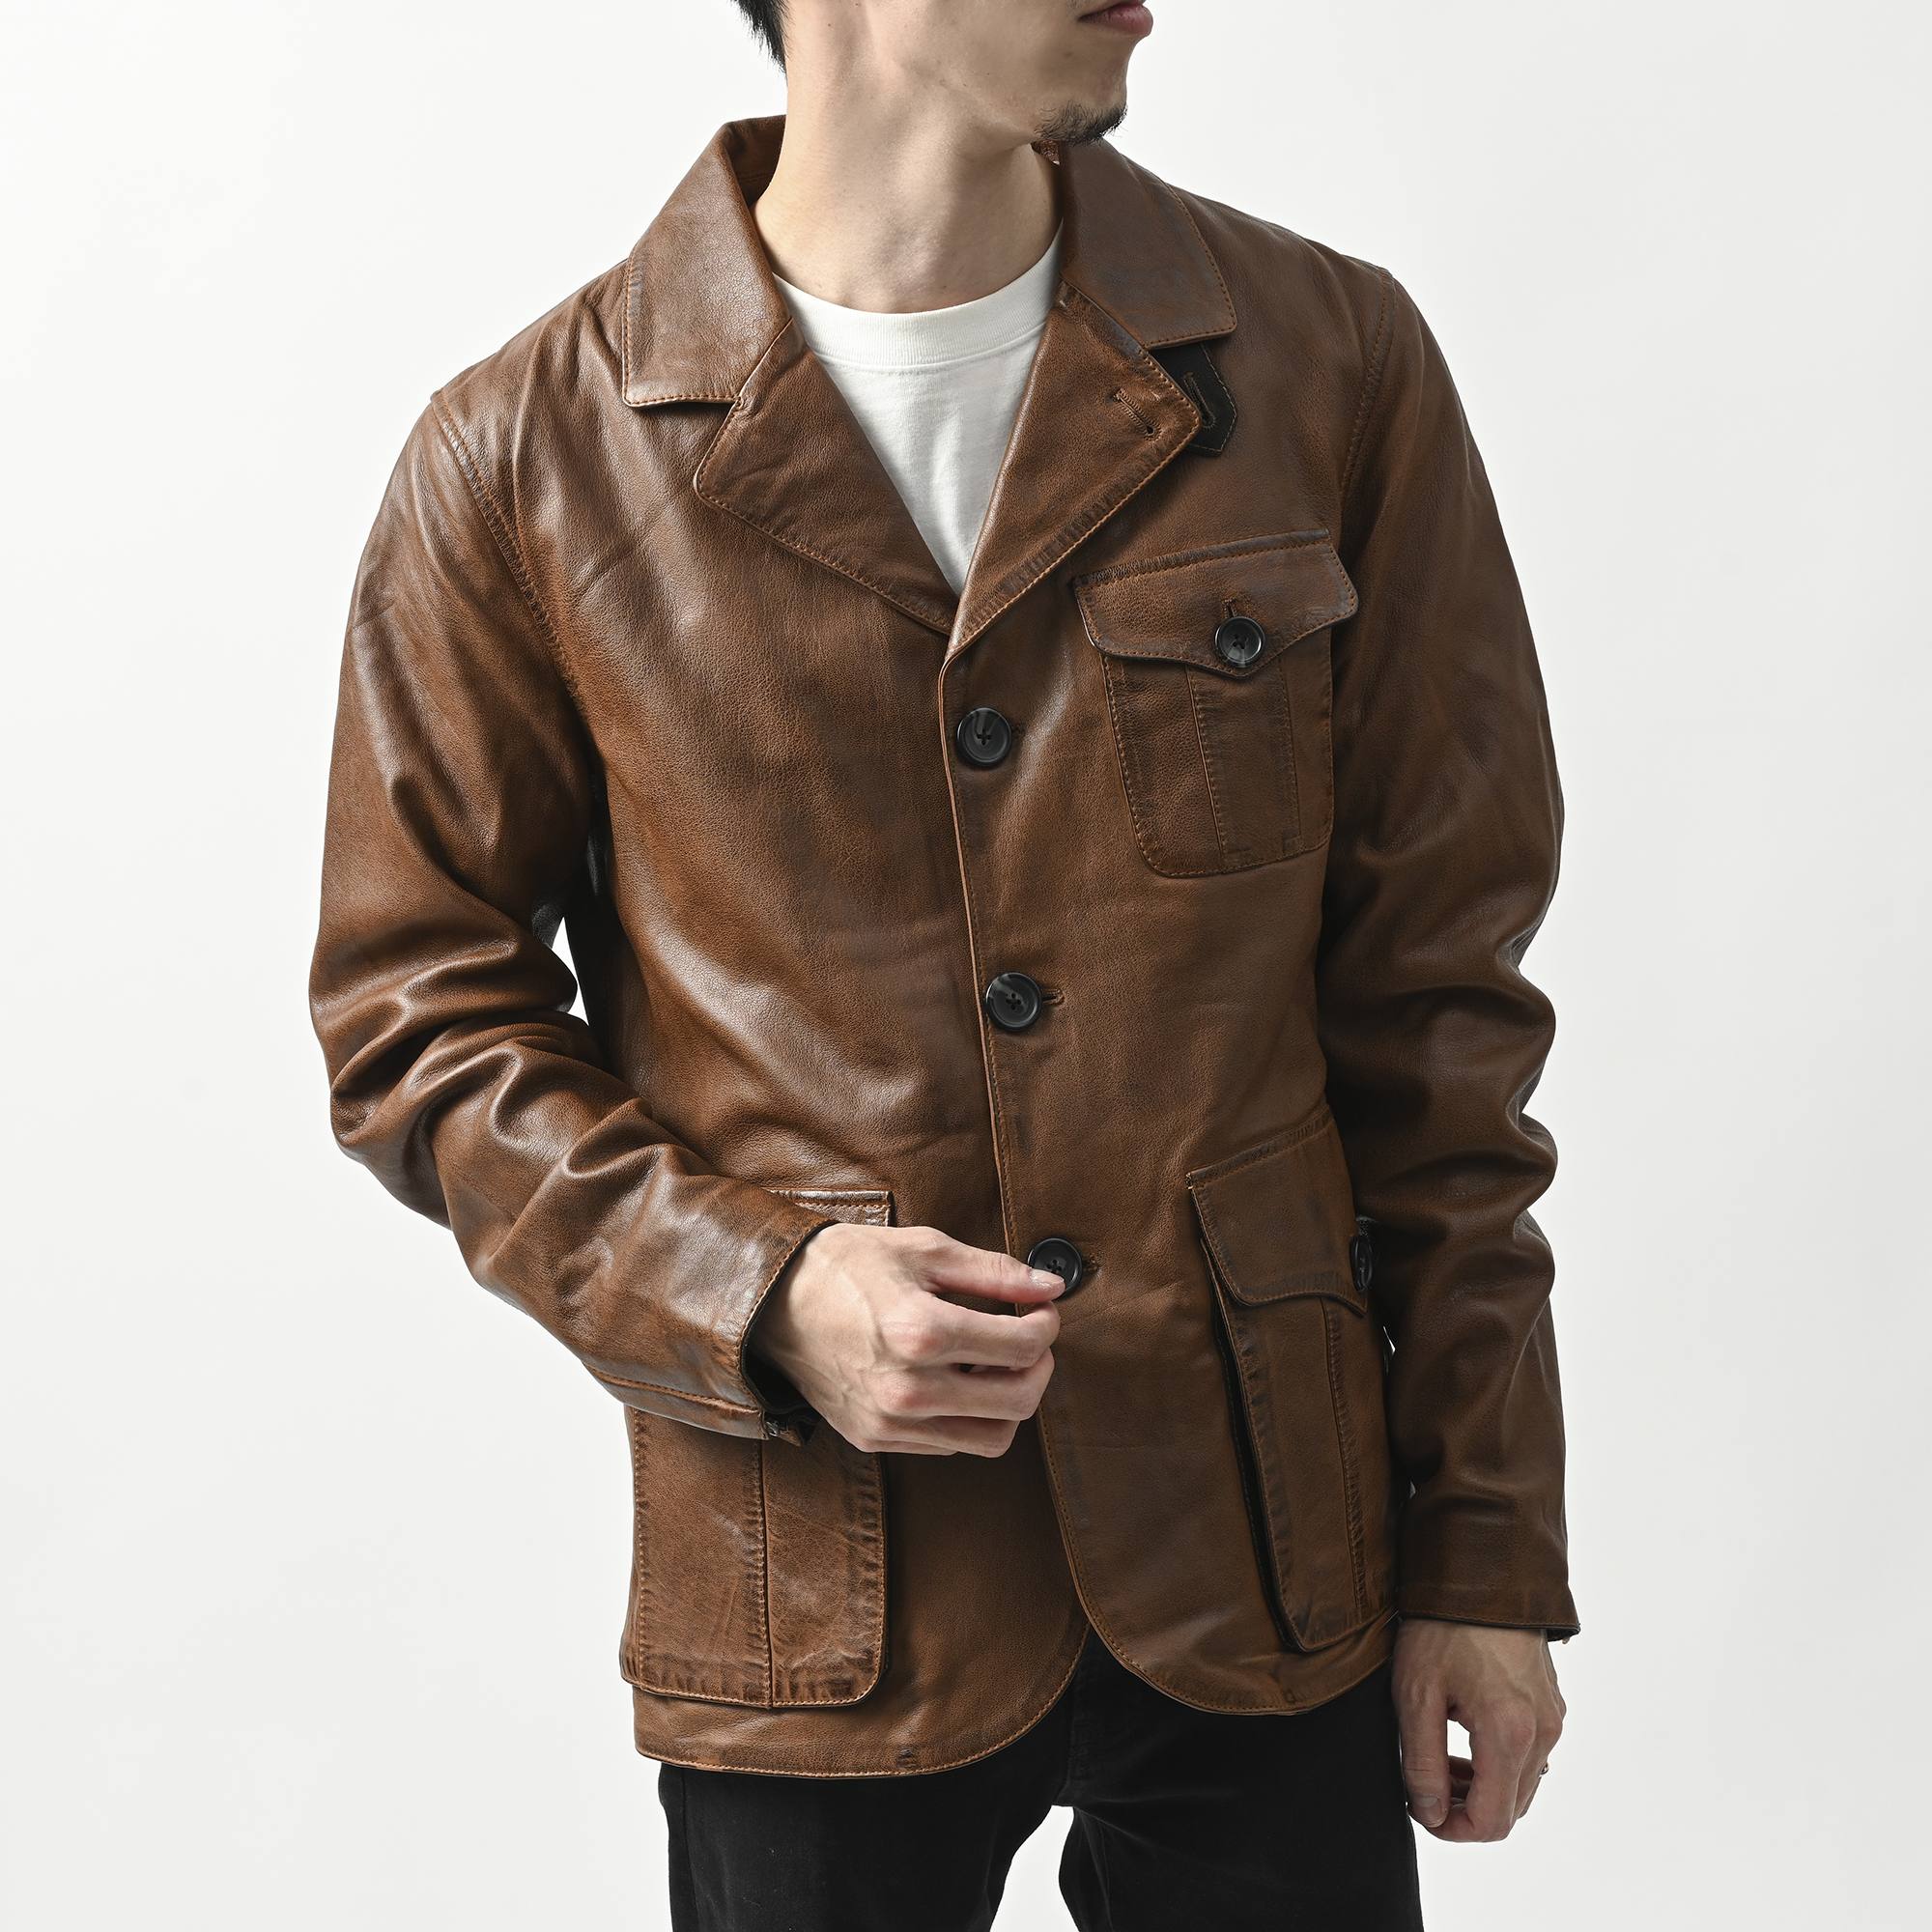 A motorcycle jacket full of charm for adults, a genuine leather 